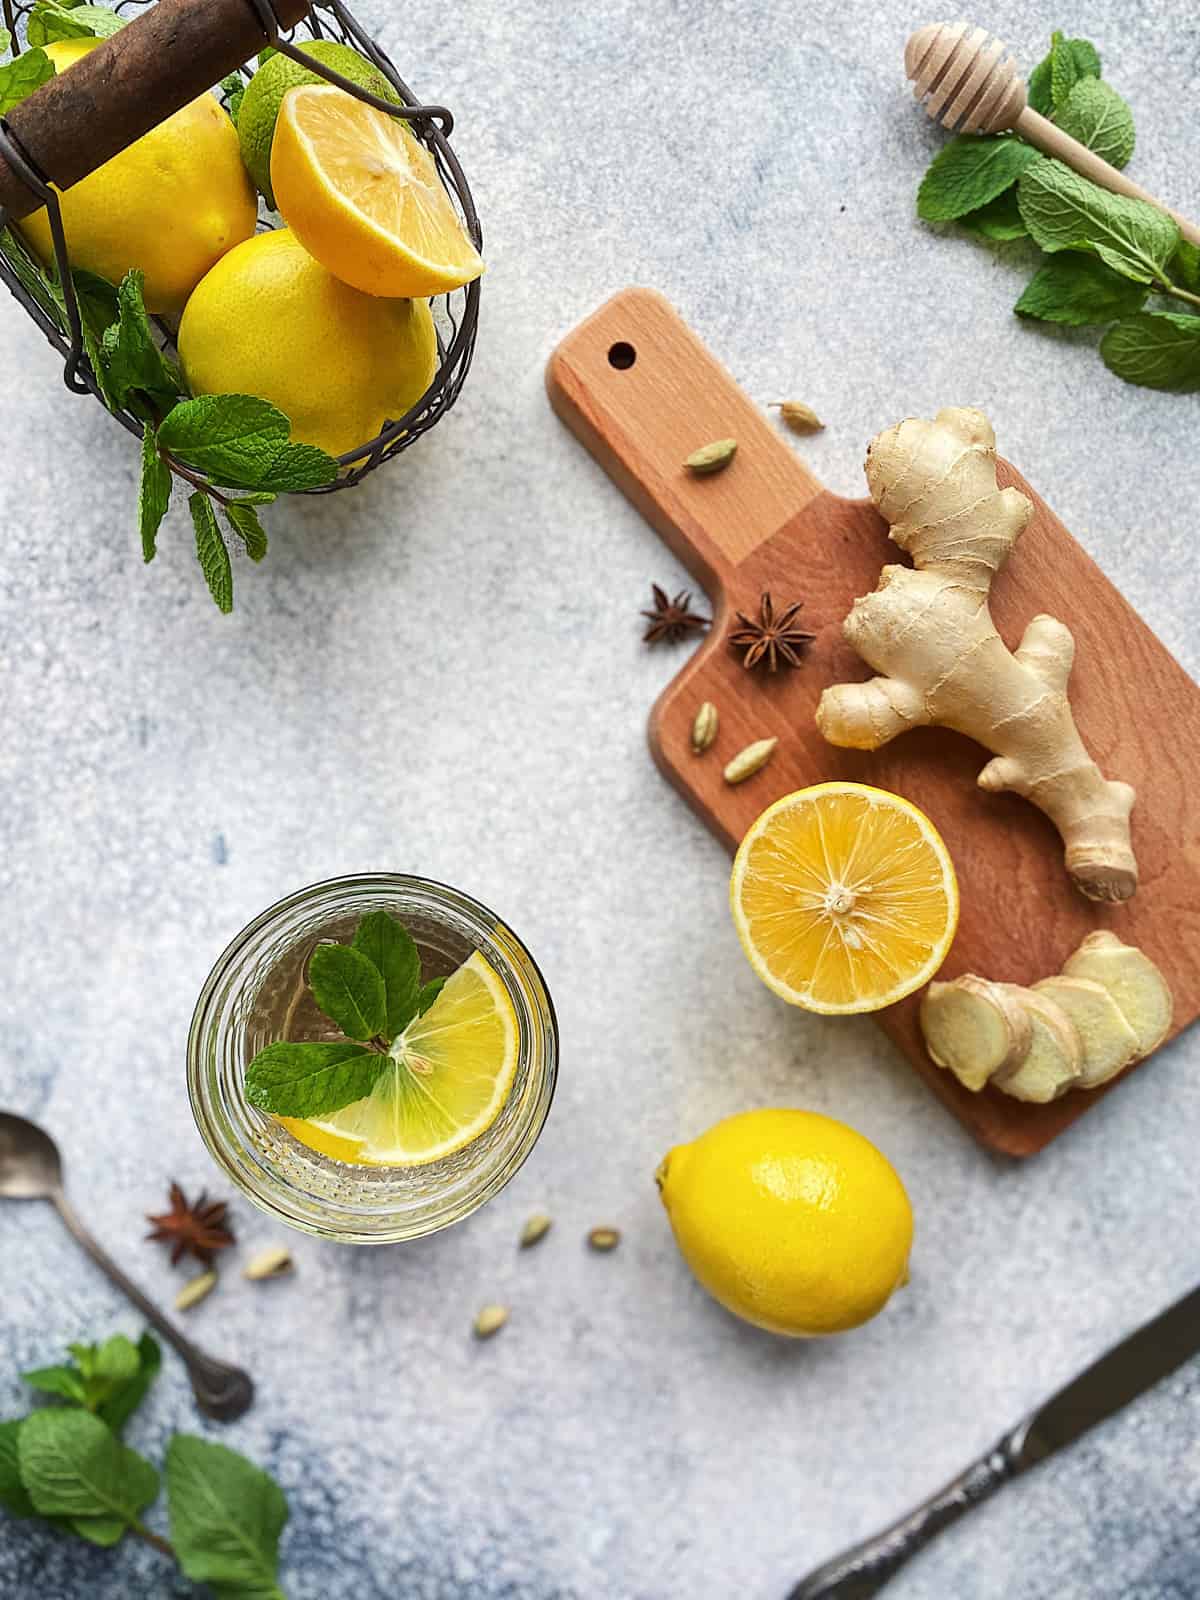 Ginger, lemons, oranges, peppermint, star anis, clover: These are great ingredients for flavoring your cup of ginger tea.